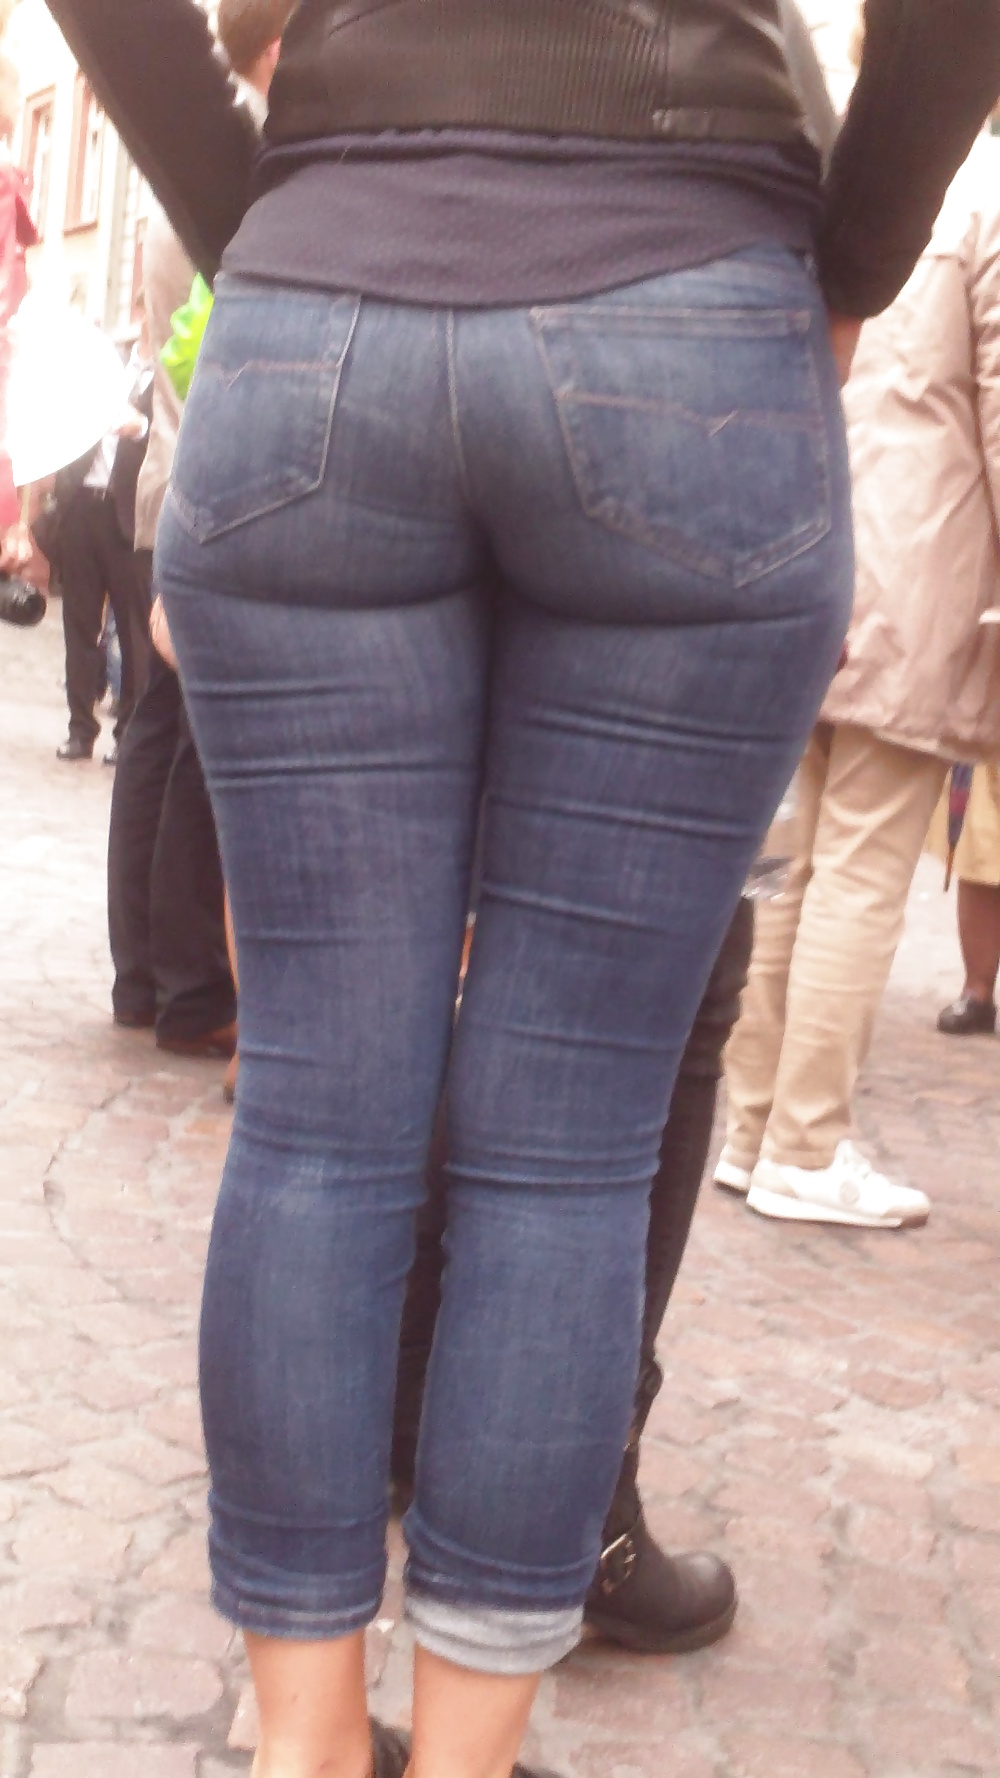 Nice big juicy teen ass & butt in very tight blue jeans  #31832243